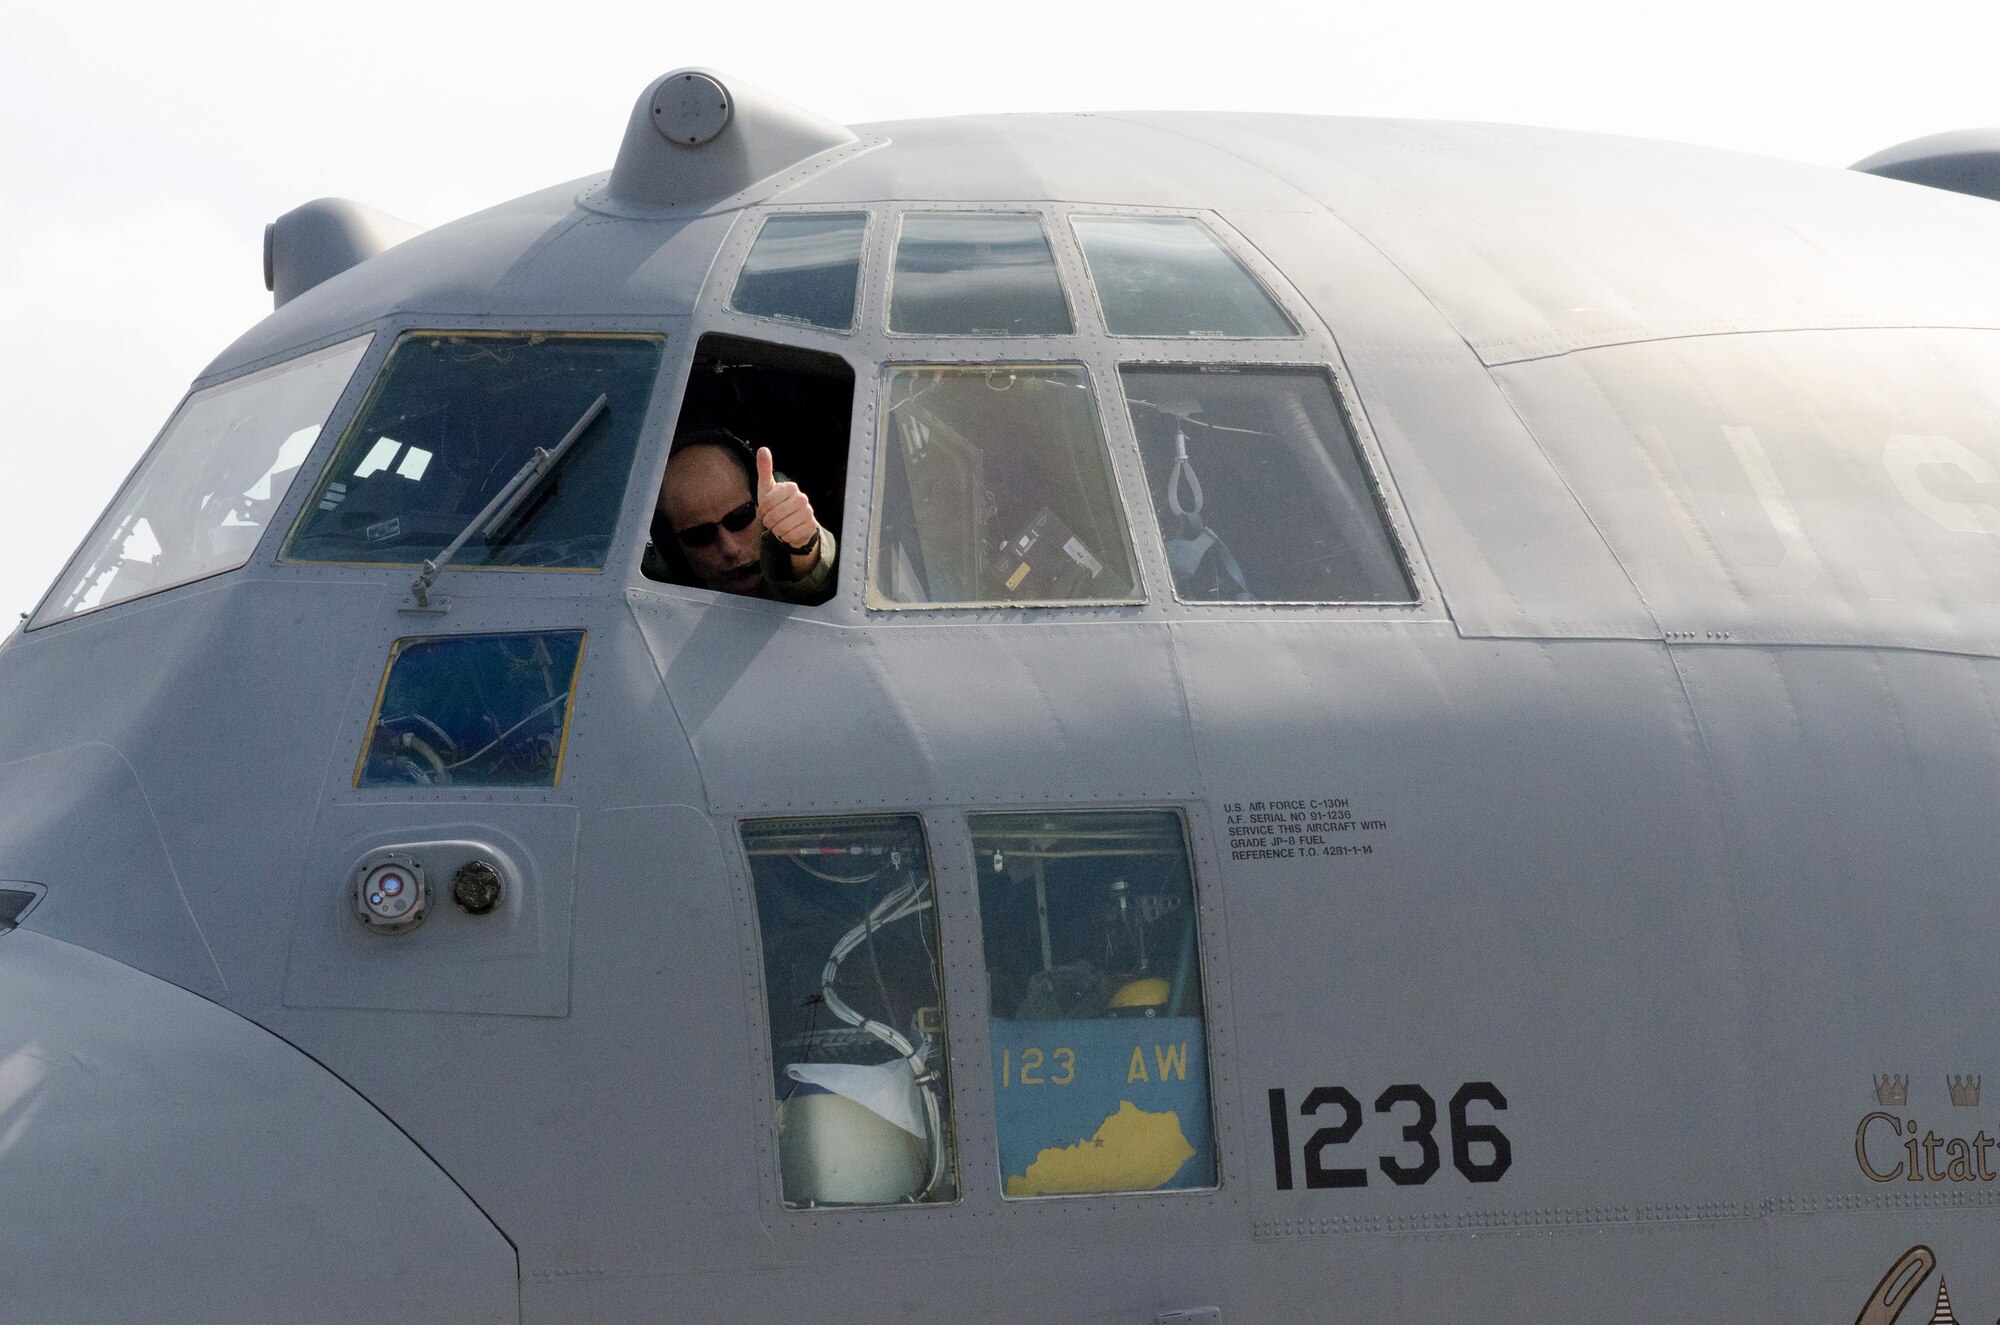 Air Force Lt. Col. Charles Hans, an aircraft commander with the Kentucky Air National Guard’s 123rd Airlift Wing, communicates with ground crews from the cockpit of his C-130 Hercules aircraft after returning from an airdrop mission in the Baltic region on Sept. 8, 2014, during Operation Saber Junction. The 123rd participated in the training exercise along with five other Air Guard units and troops from 17 NATO countries. (U.S. Air National Guard photo by 2nd Lt. James W. Killen)